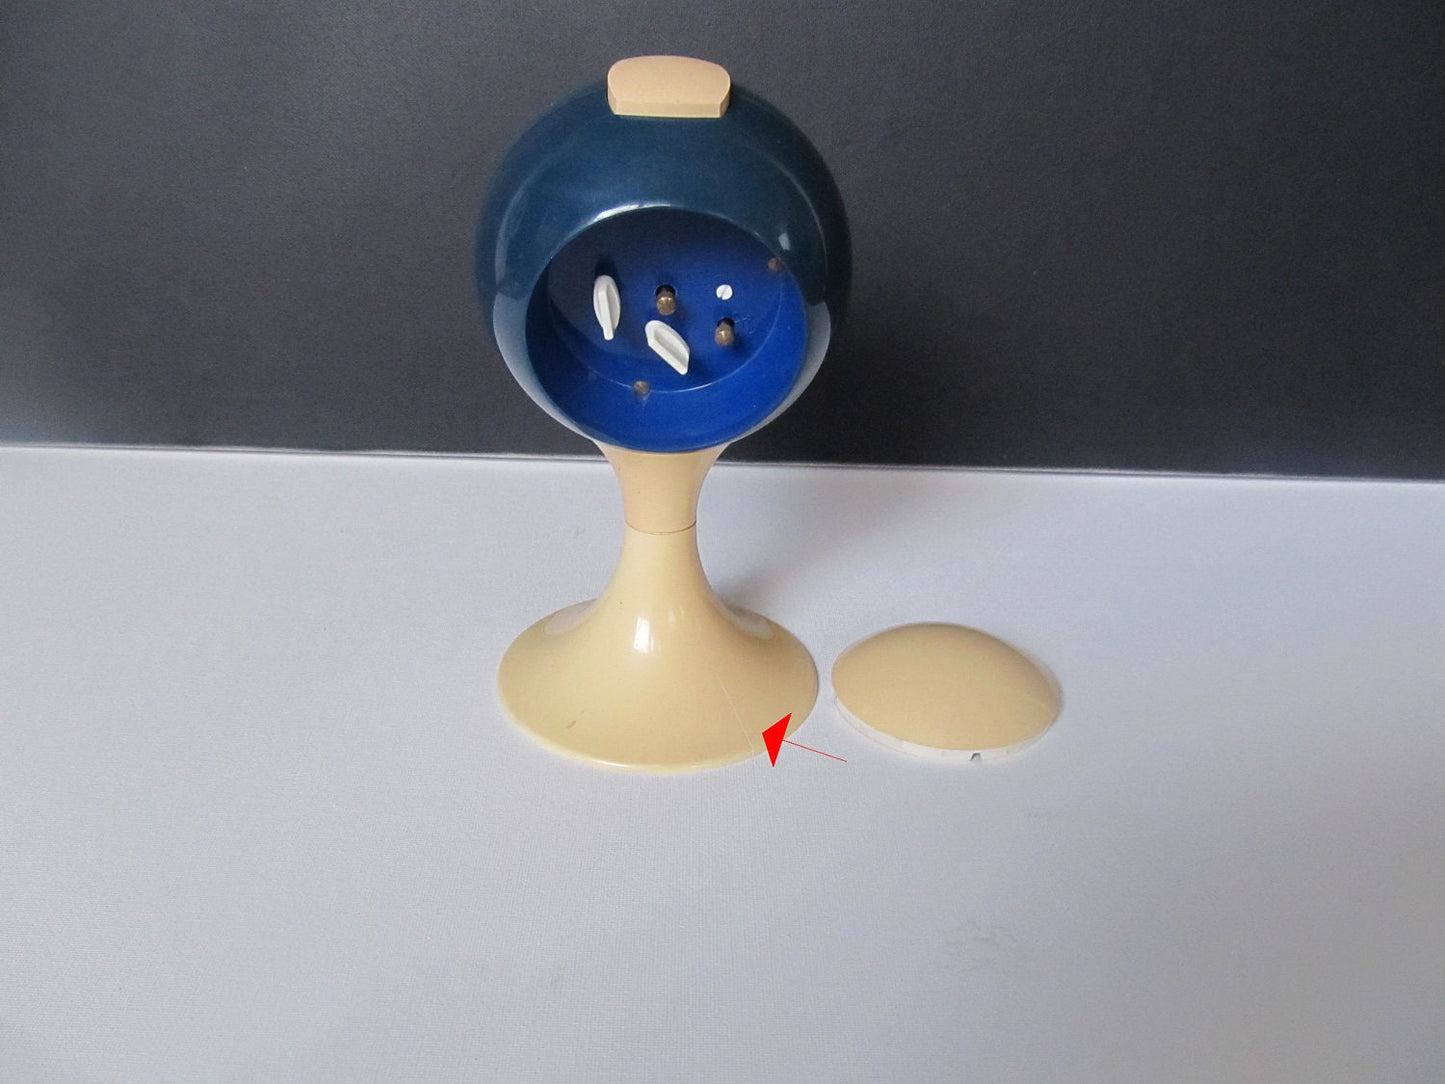 alarm clock, pedestal tulip shape, West Germany. Space age era plastic alarm clock from the early 1970s